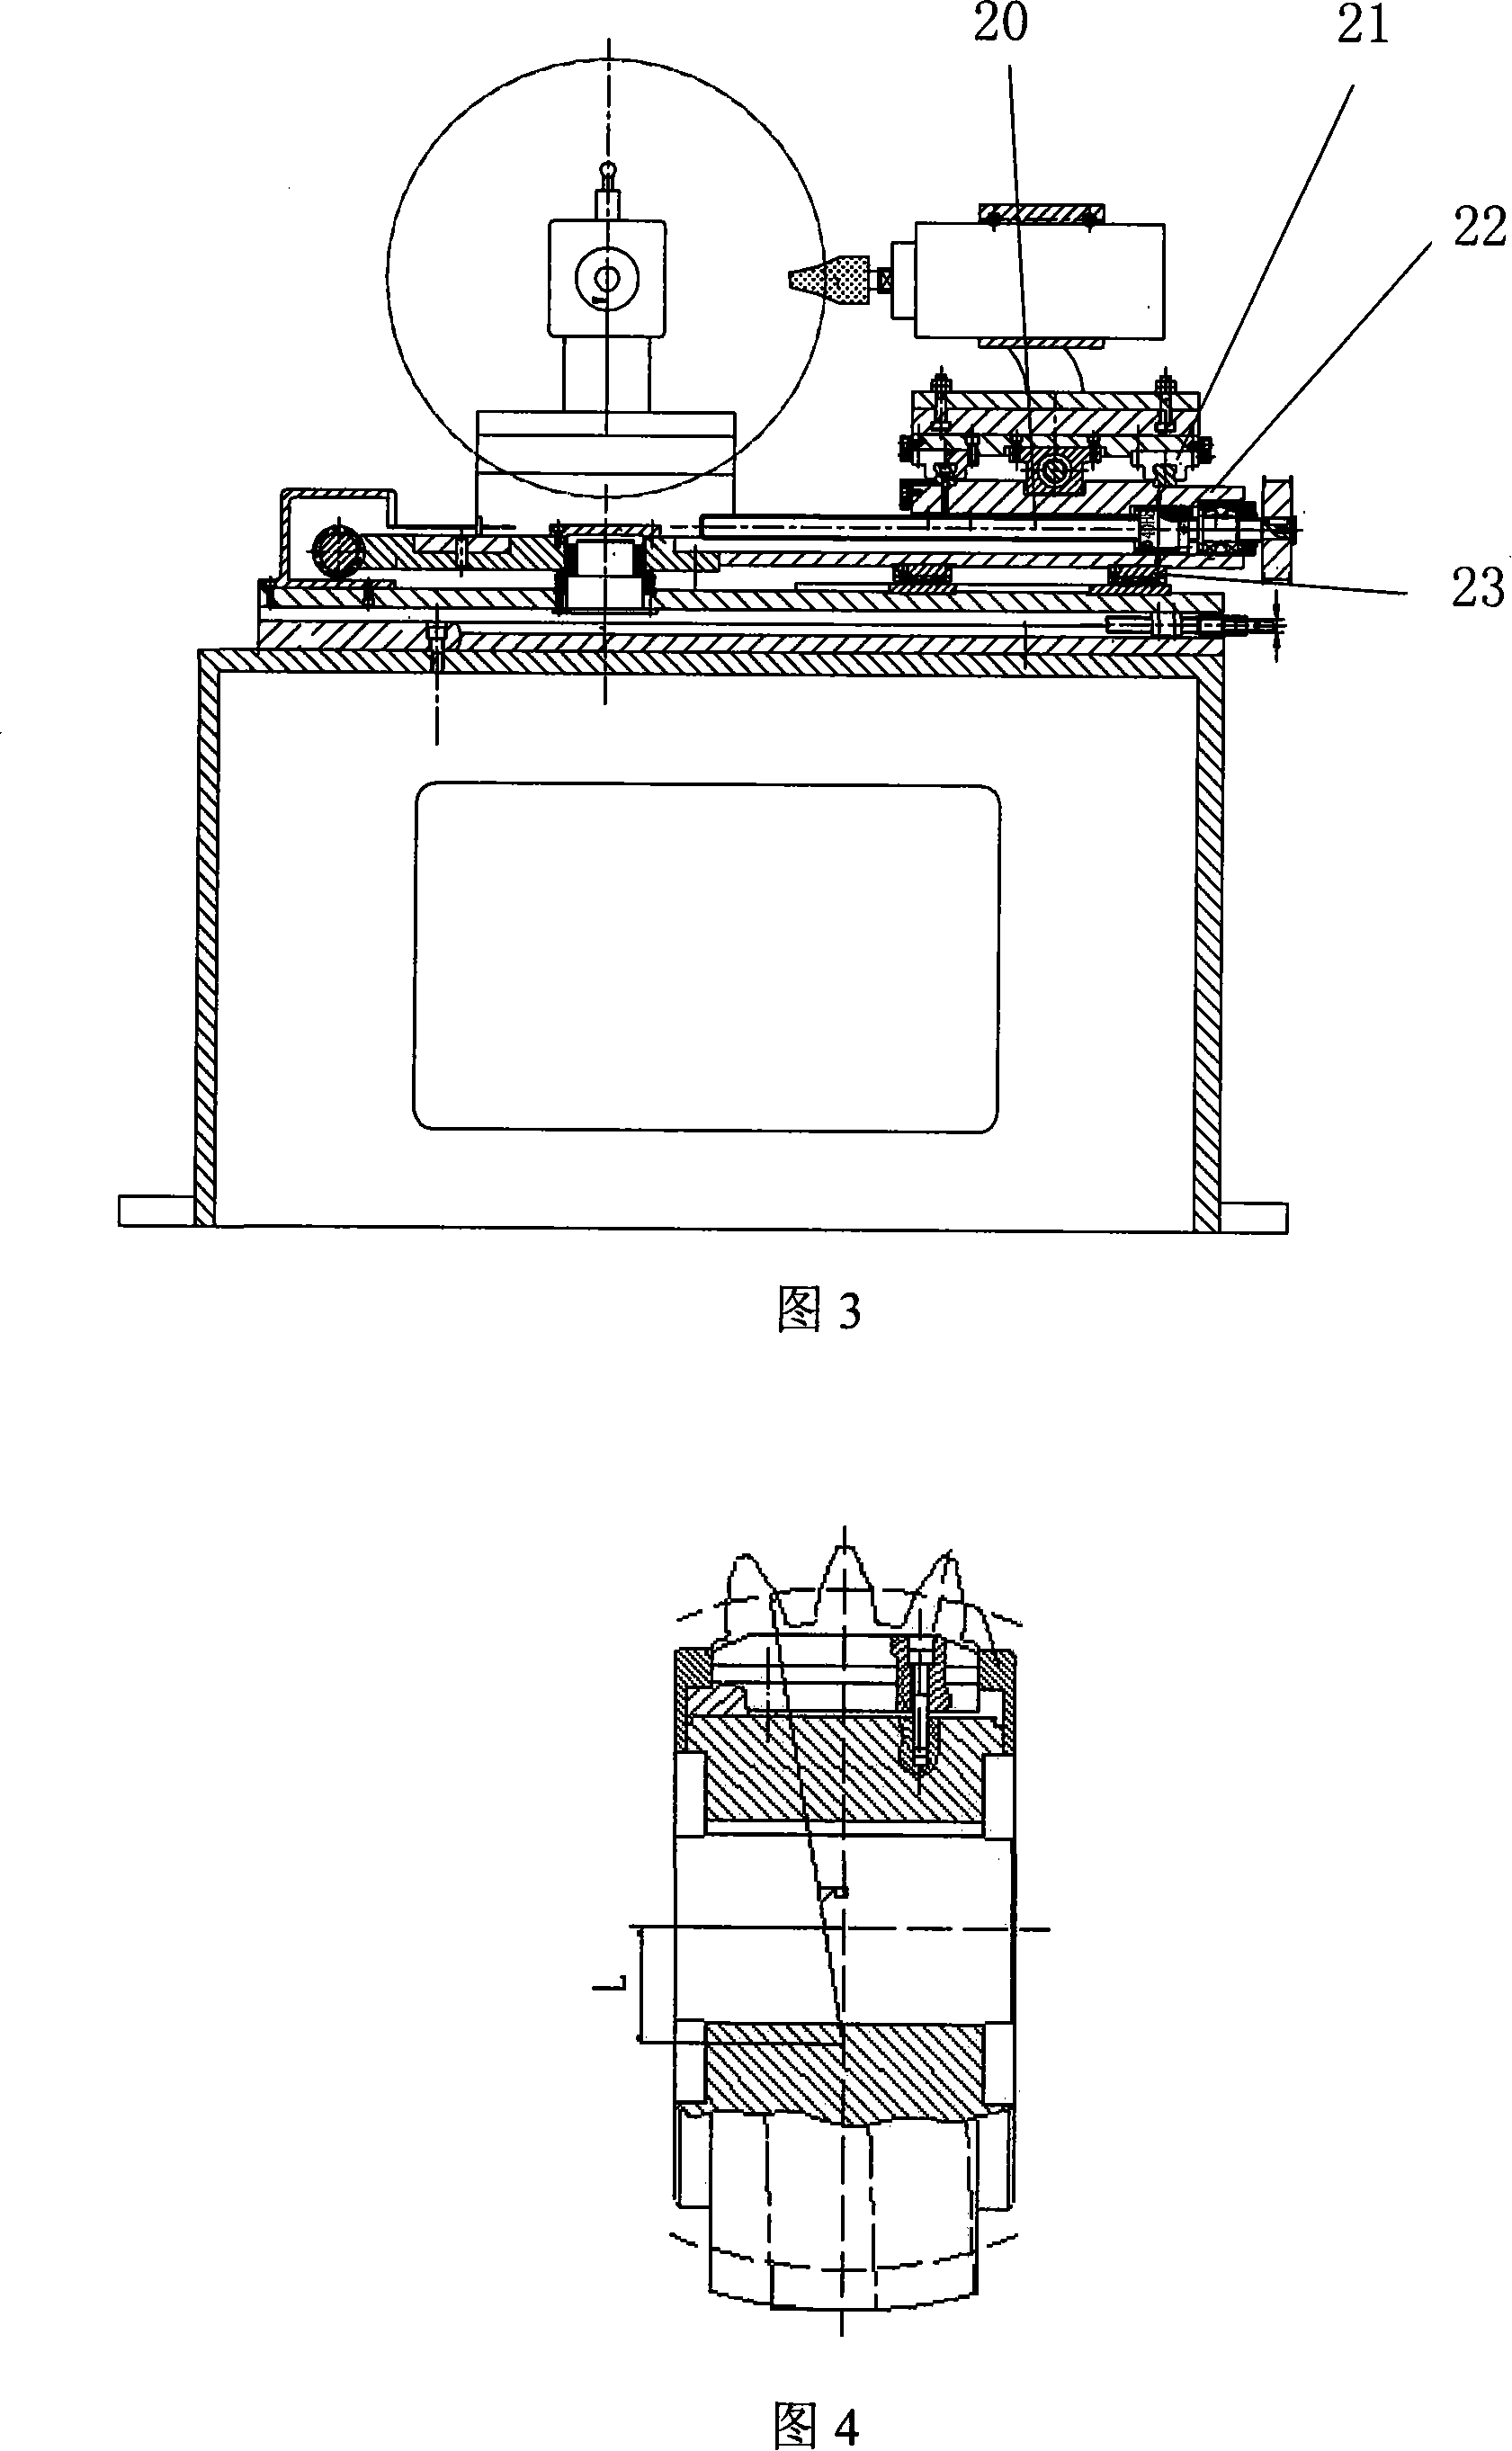 Four-shaft numerically controlled ellipsoidal and spherical hobbing cutter spade milling machine tool